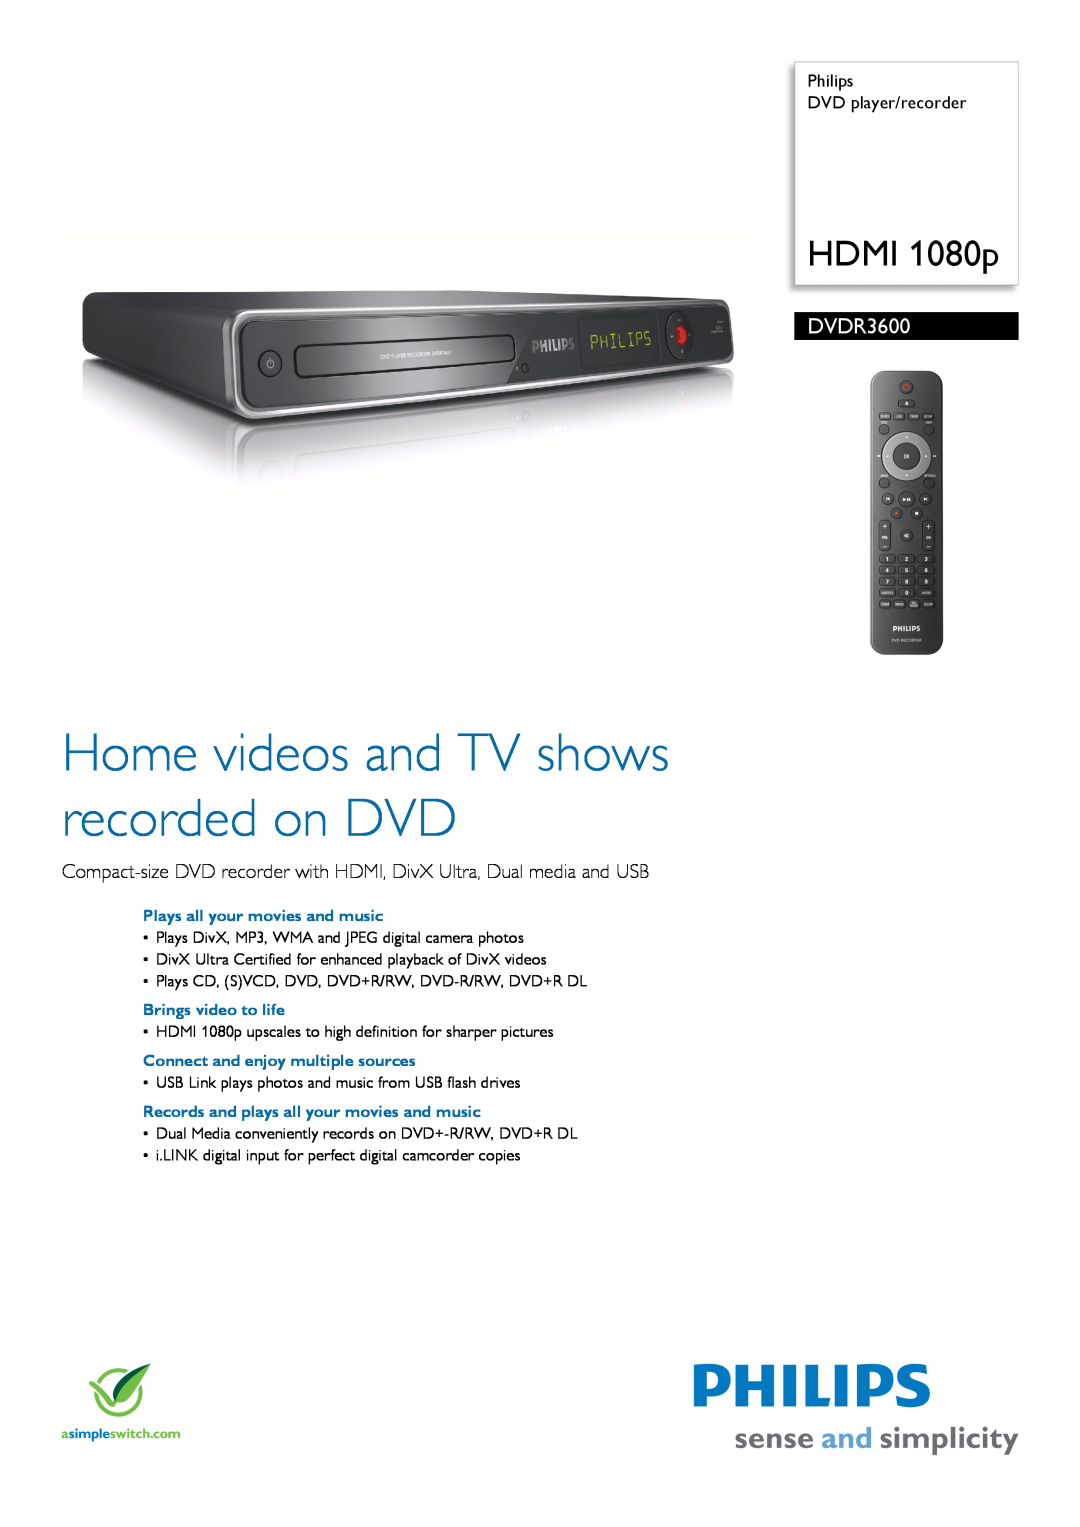 Philips DVDR3600/97 manual Philips DVD player/recorder, Home videos and TV shows recorded on DVD, HDMI 1080p 